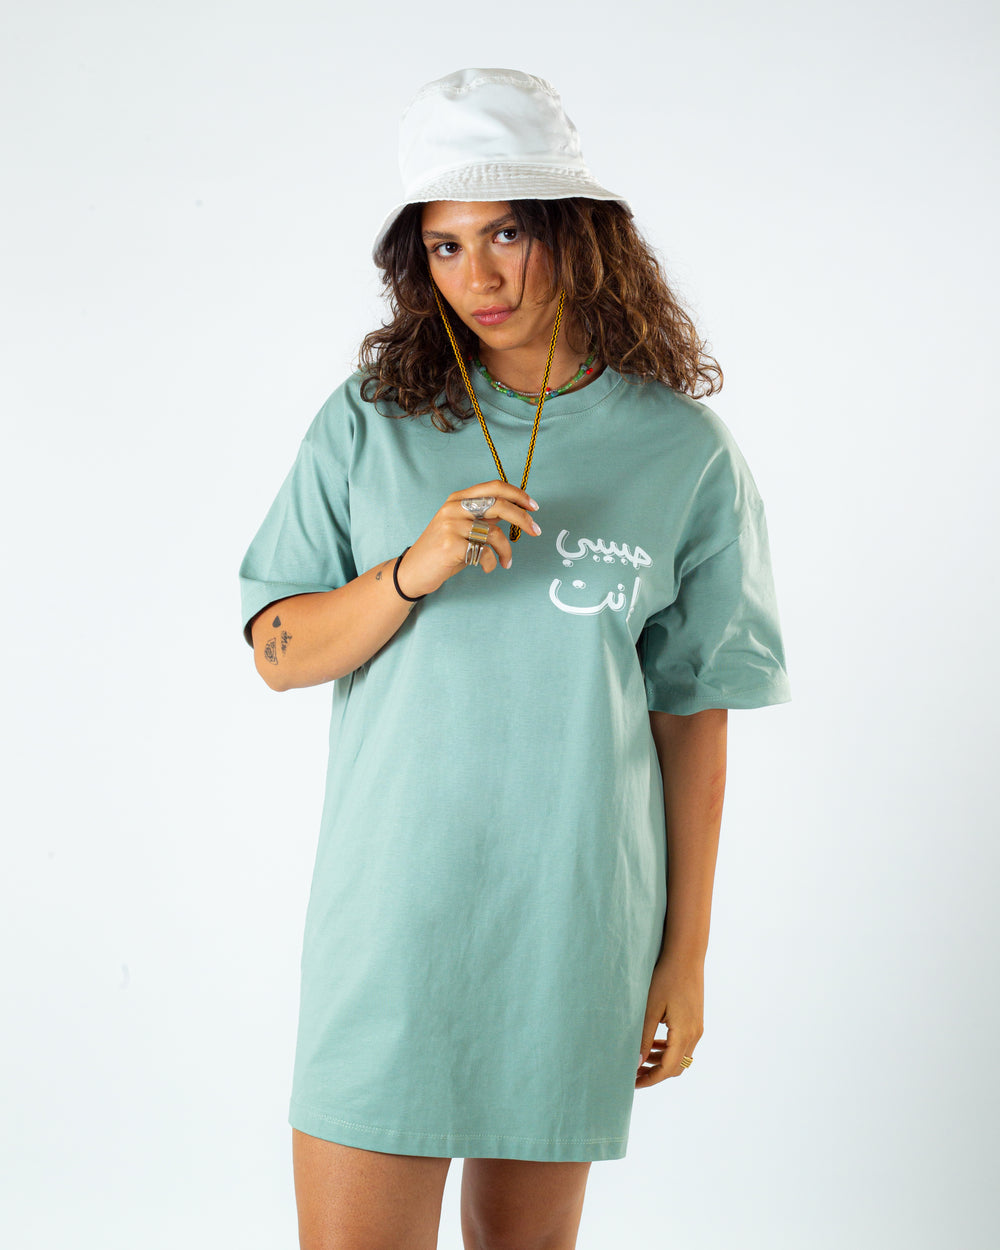 THE POWER WITHIN (PREMIUM OVERSIZED MINT TEE)